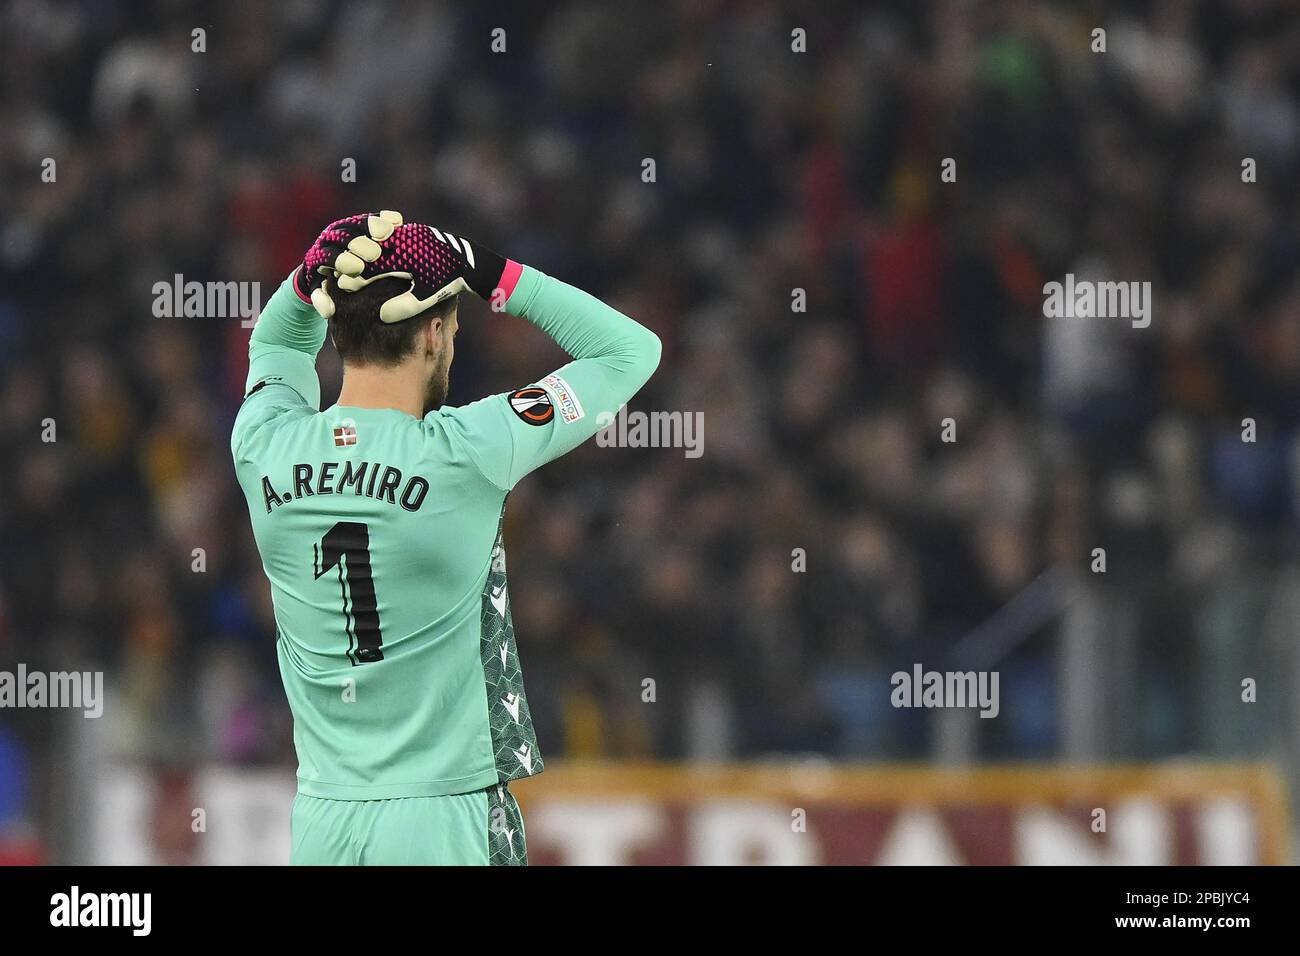 Alejandro Remiro of Real Sociedad de Futbol during the first leg of the round of 16 of the UEFA Europa League between A.S. Roma and Real Sociedad de Futbol on March 9, 2023 at the Stadio Olimpico in Rome. Stock Photo